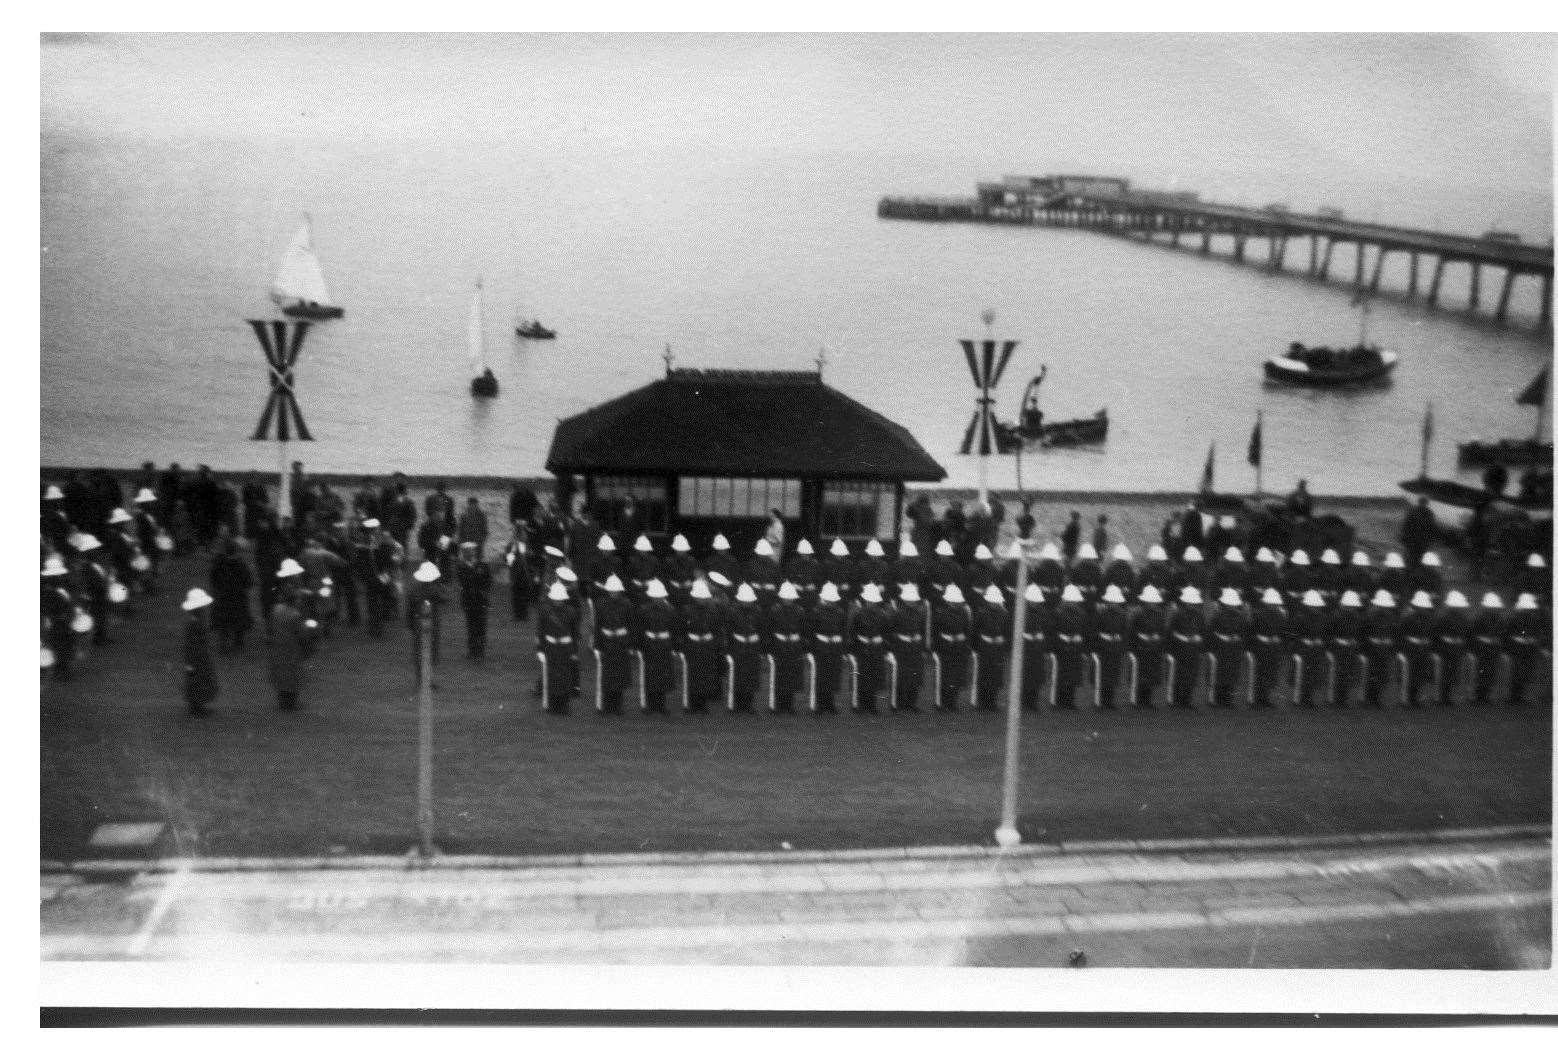 The Royal Marines attended when Prince Philip visited Deal Pier in 1957